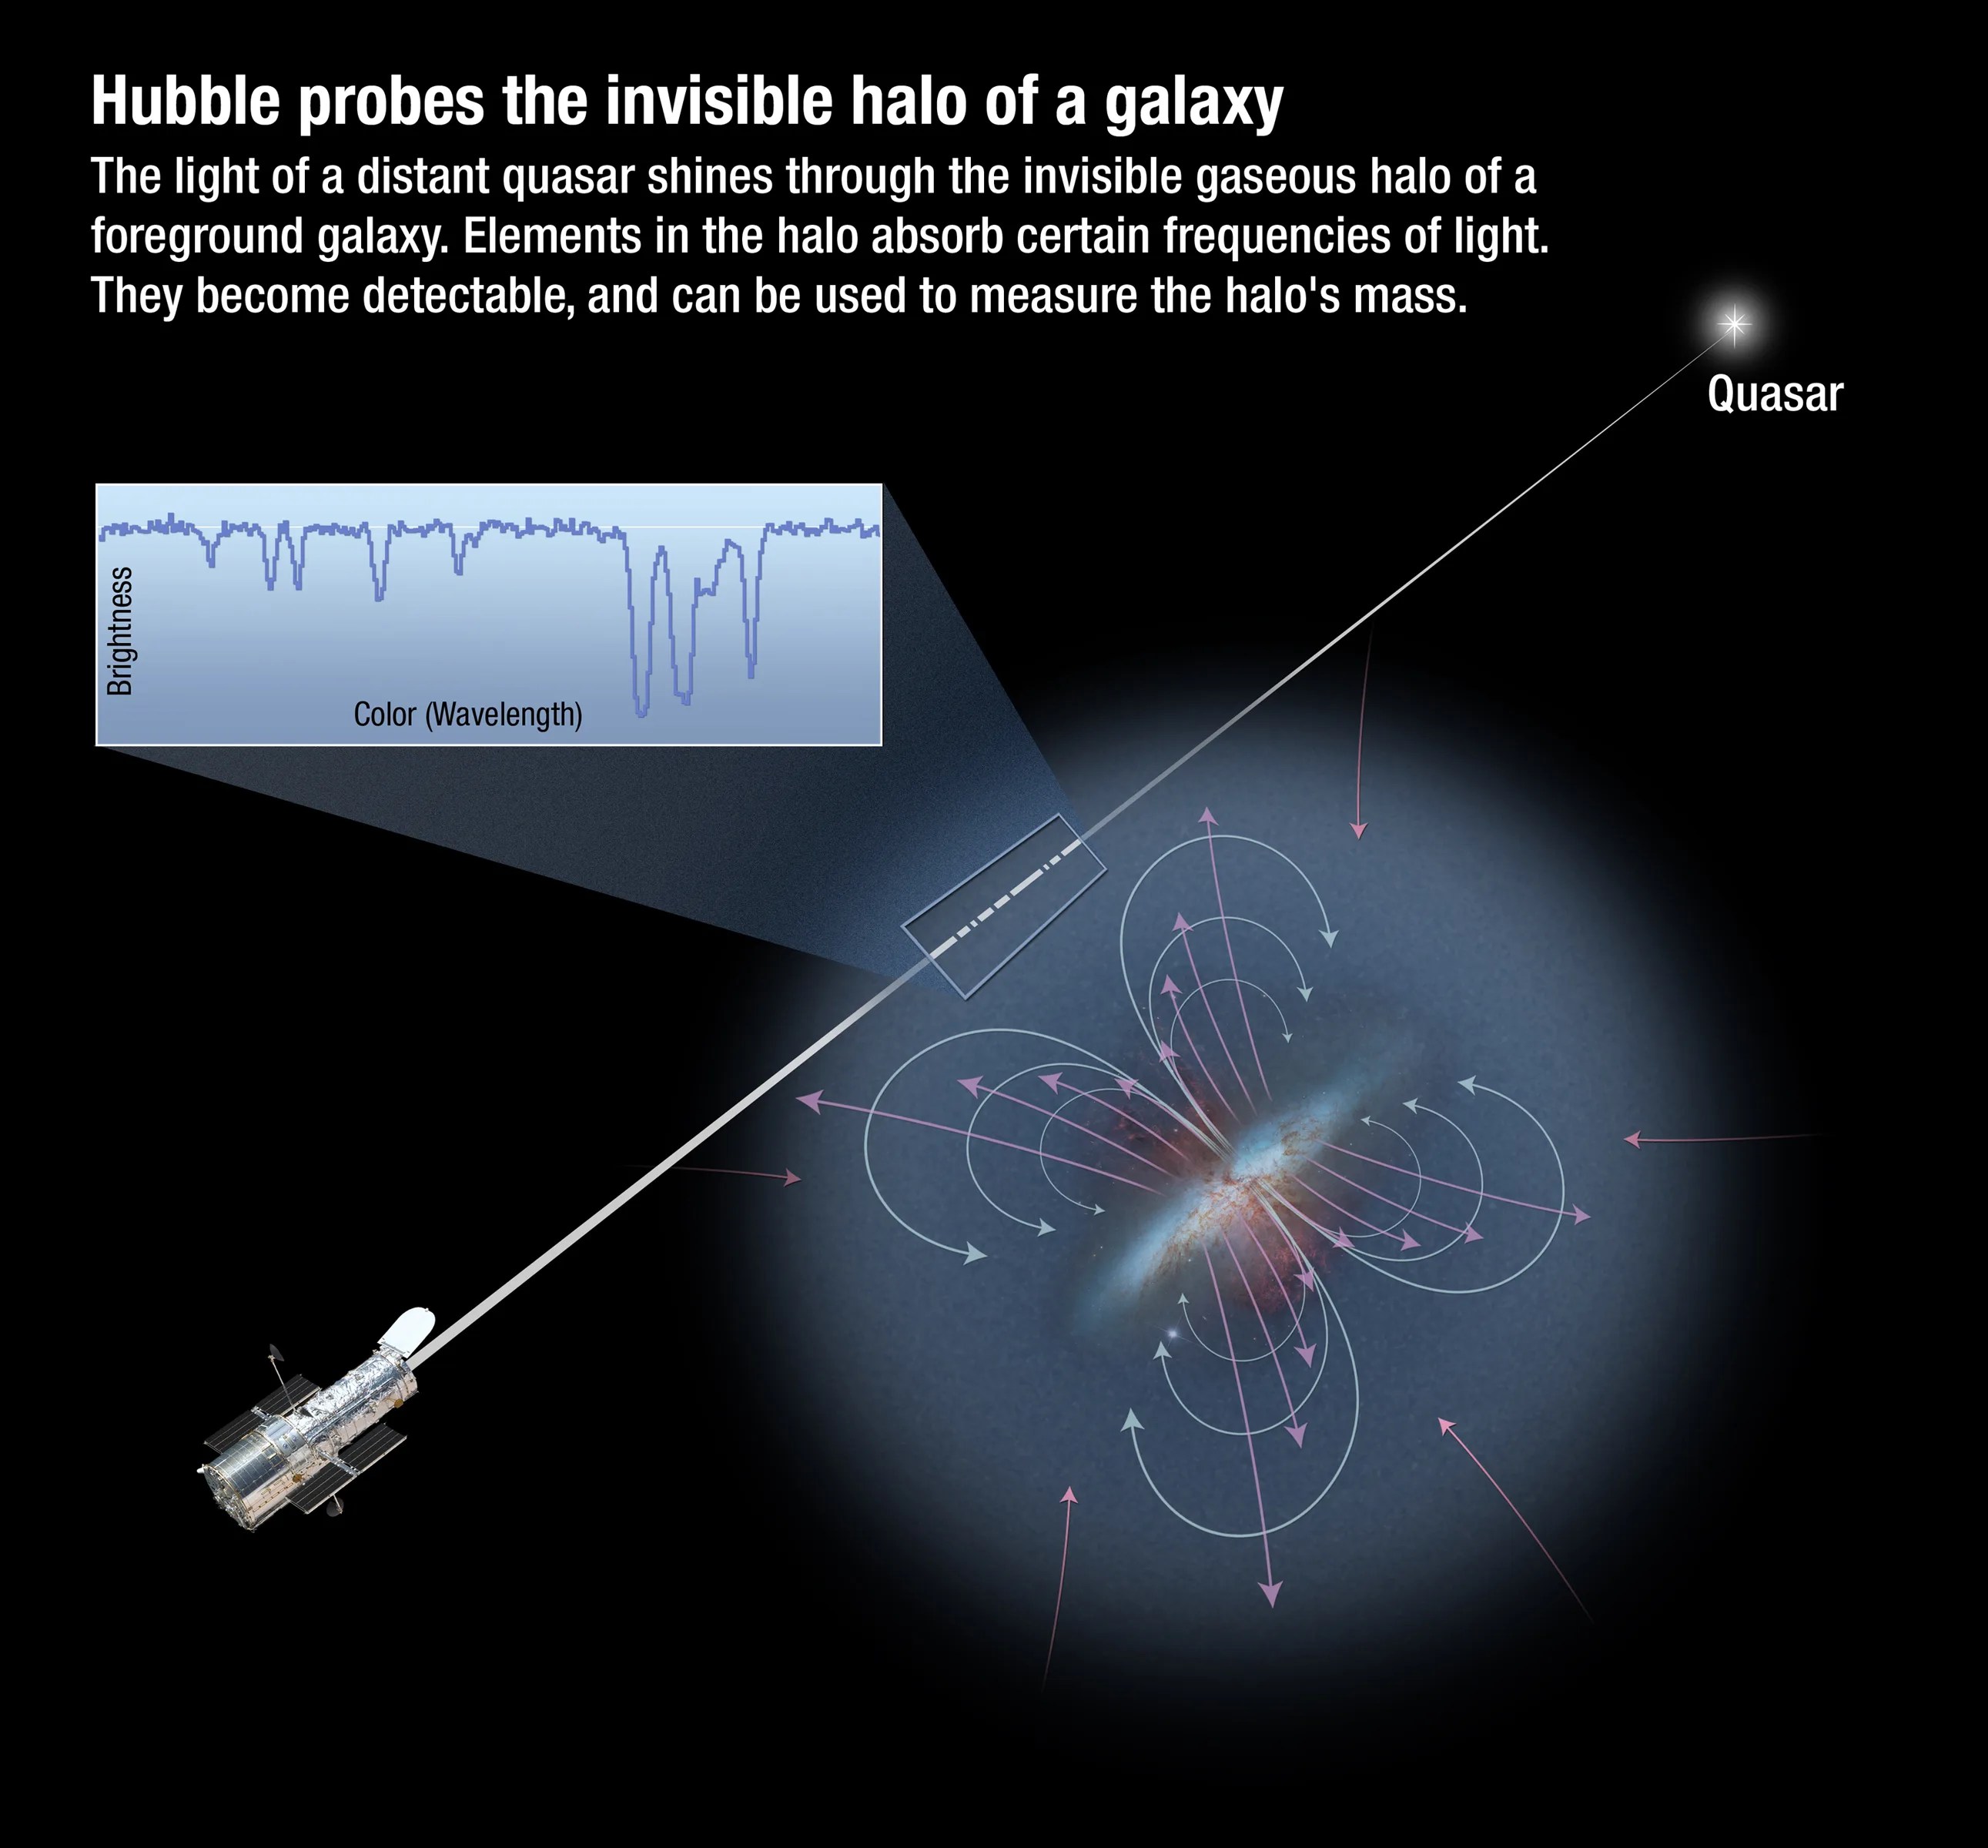 illustration of how Hubble can observe a galaxy's halo by looking at a more distant quasar